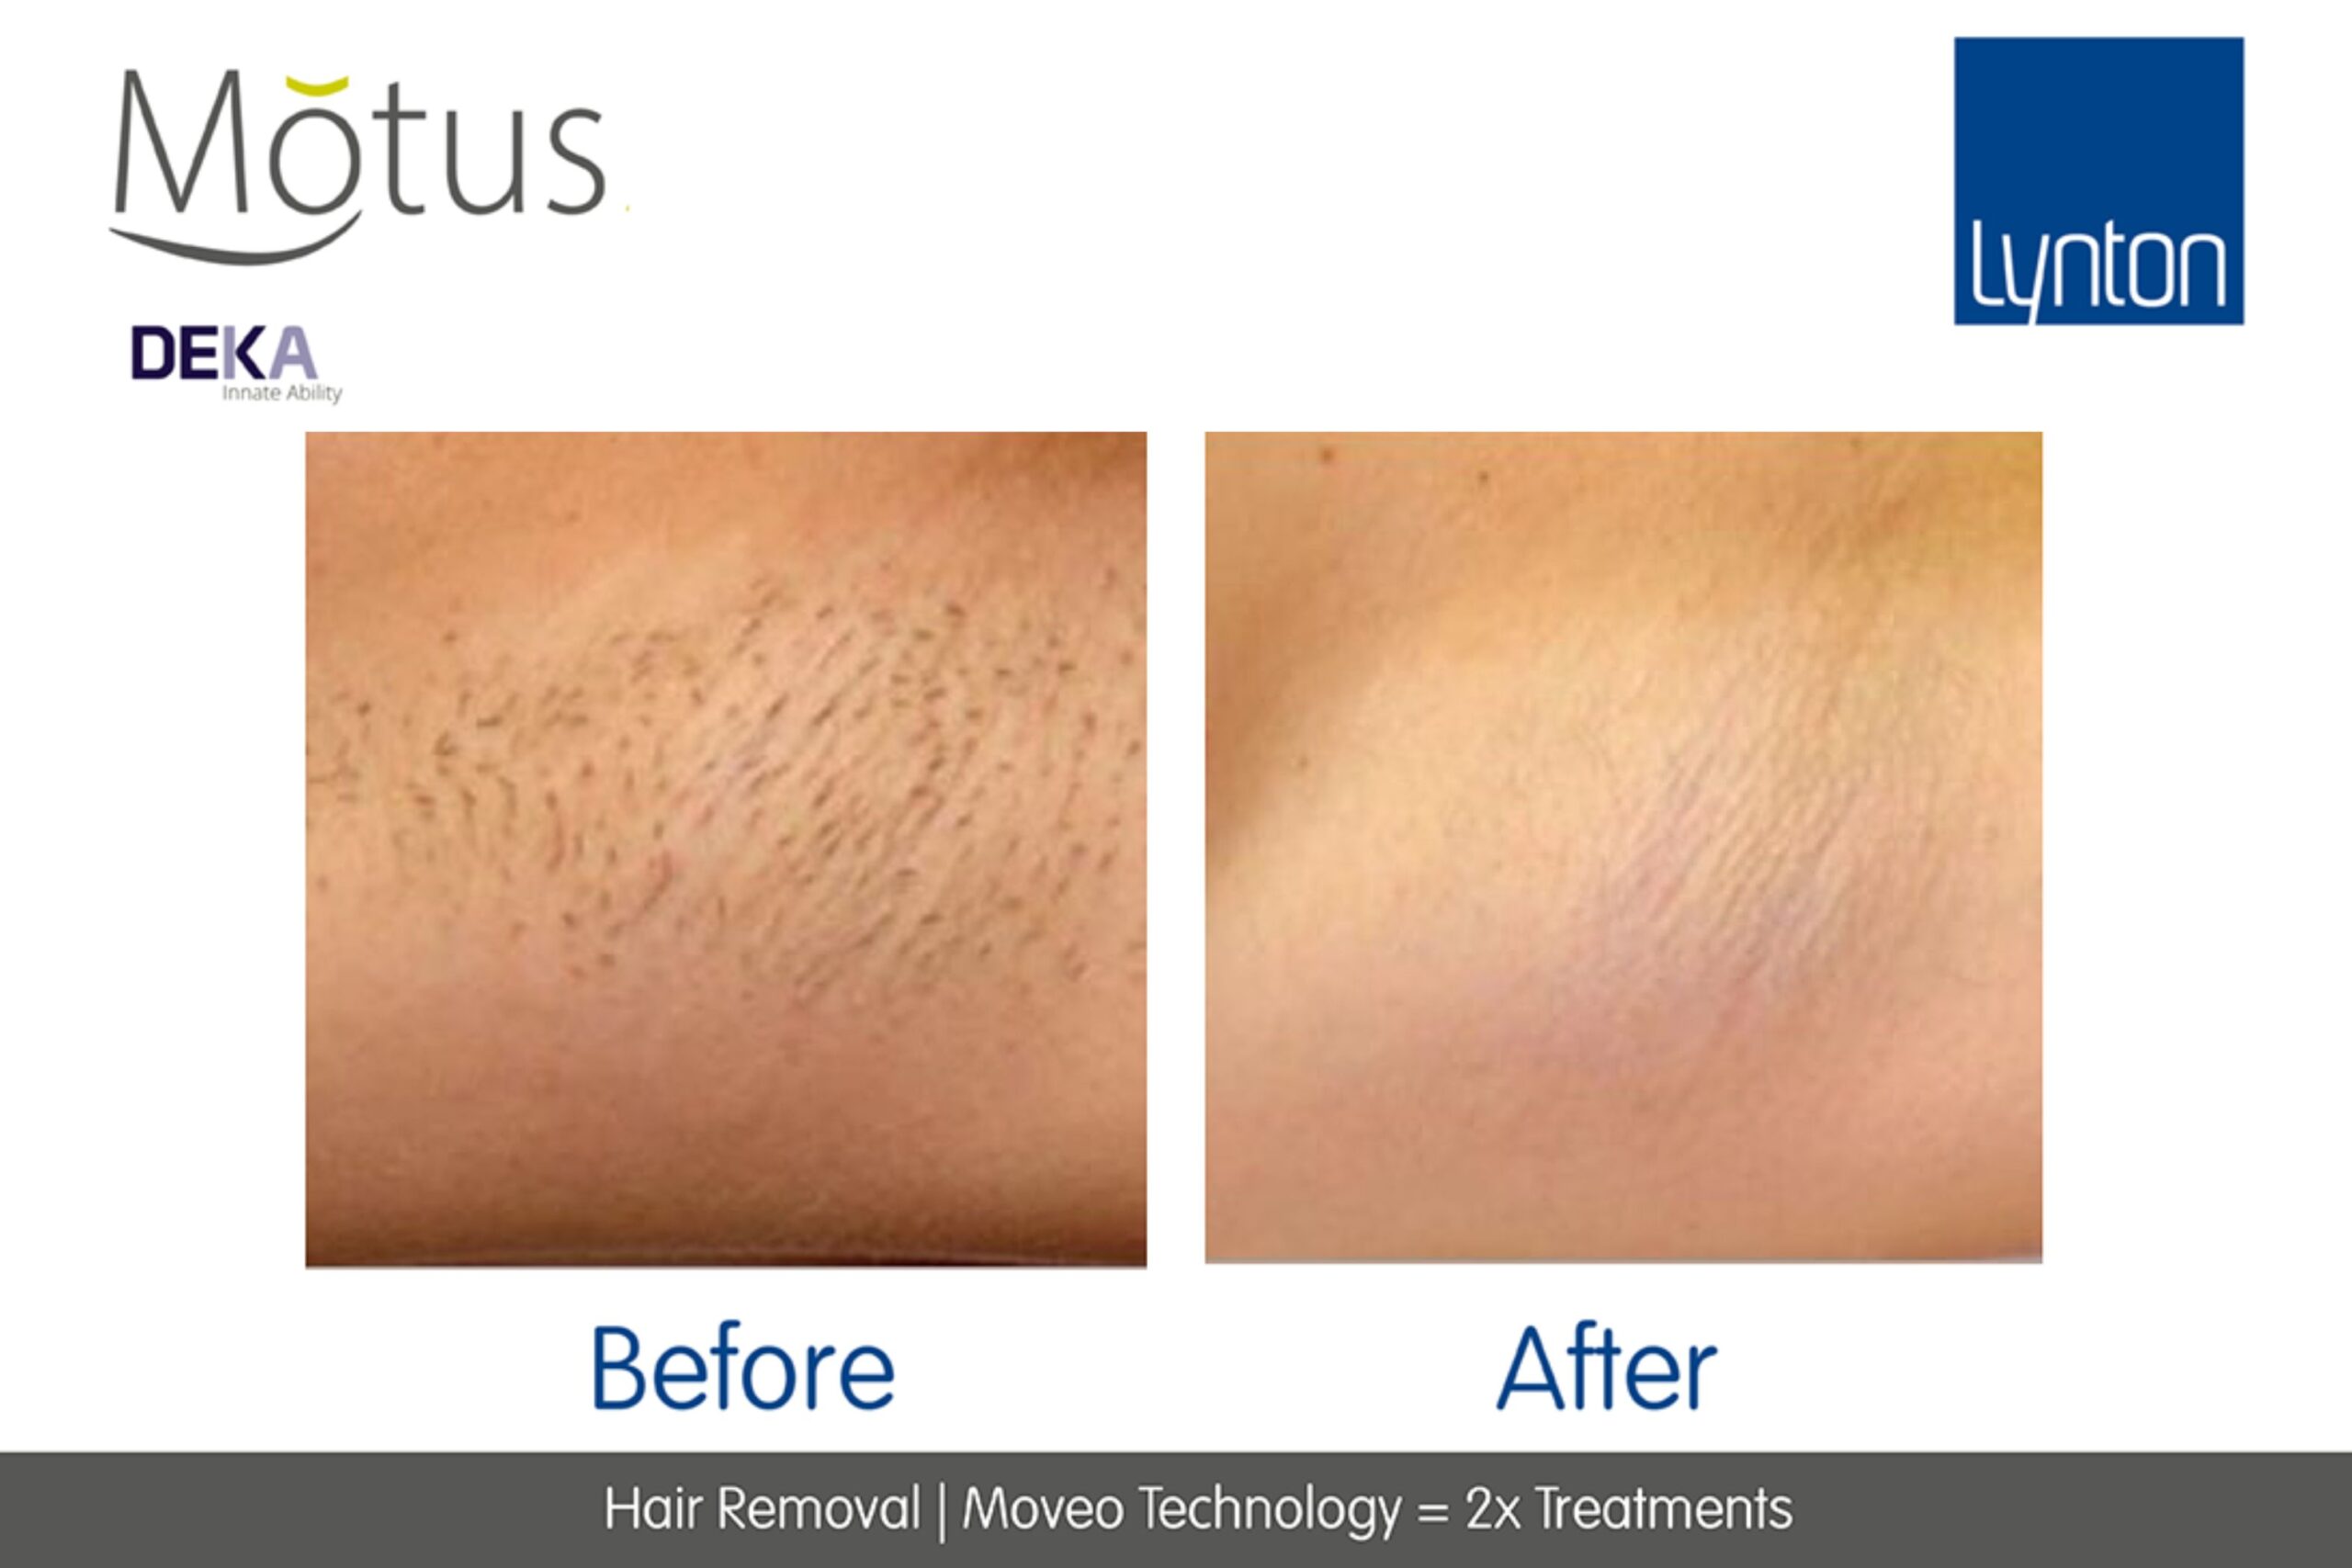 Underarm Laser Hair Removal with the Motus AY at Freyja Medical: Before and After Image